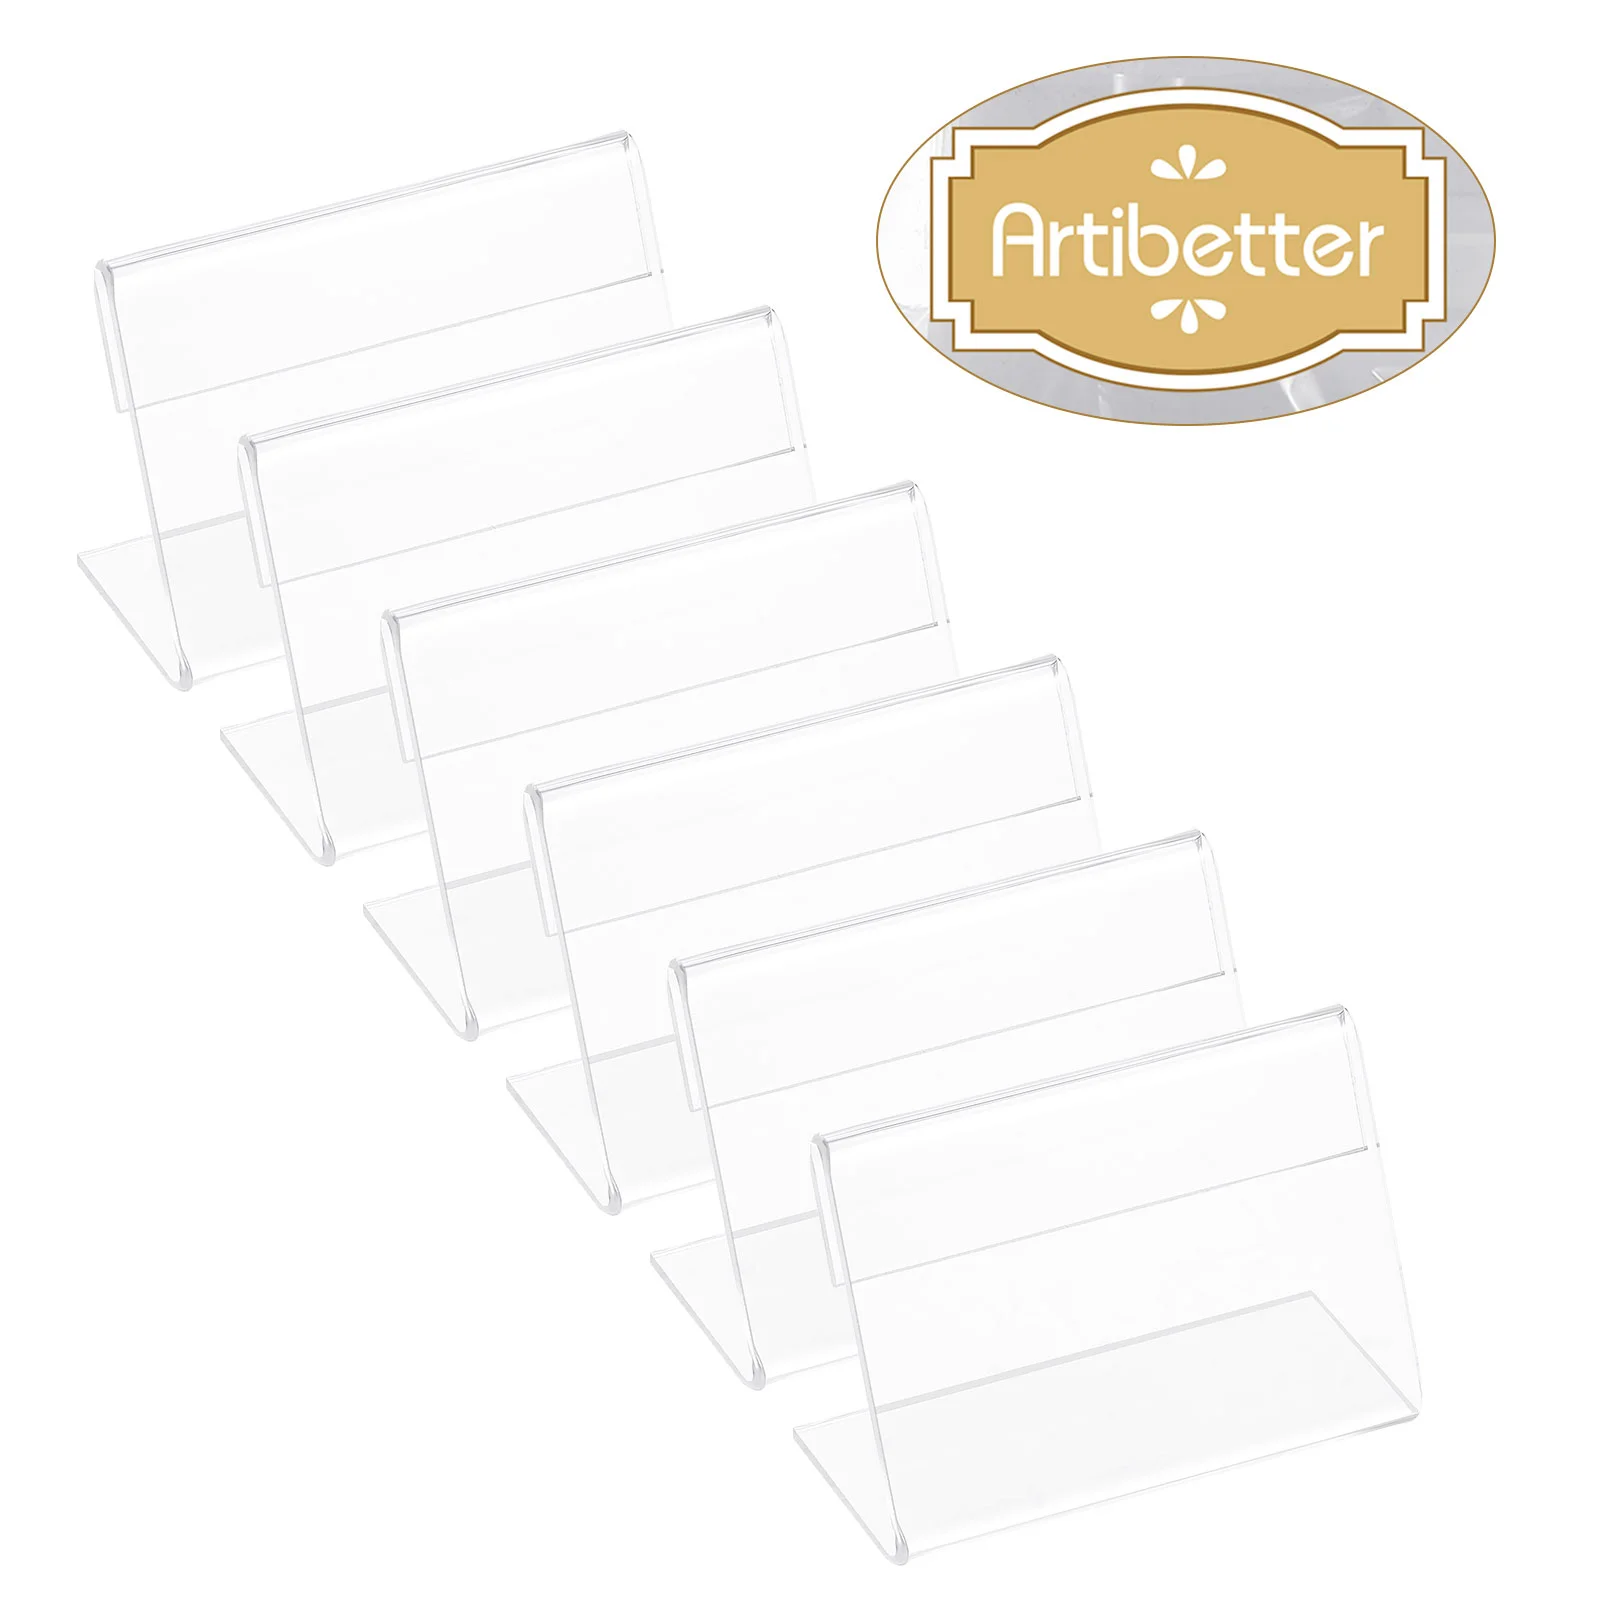 

ARTIBETTER 20pcs Acrylic Sign Display Holder Price Name Cards Rack Label Slanted Tag Stand